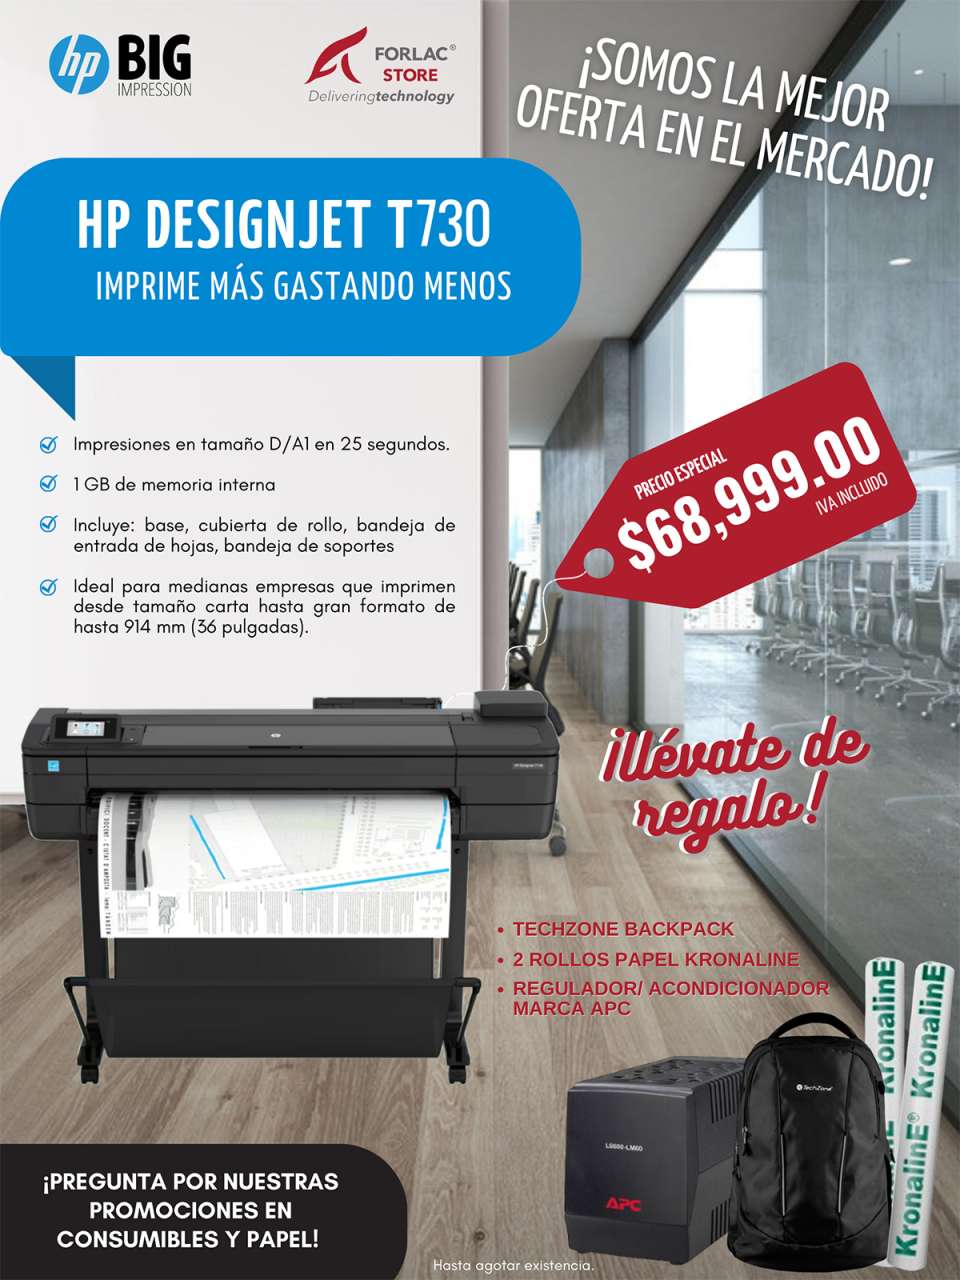 D/A1 size prints in 25 sec., 1 GB internal memory, Includes: base, roll cover, sheet and media input tray, large format letter size printing. $68,999. TAX INCLUDED.